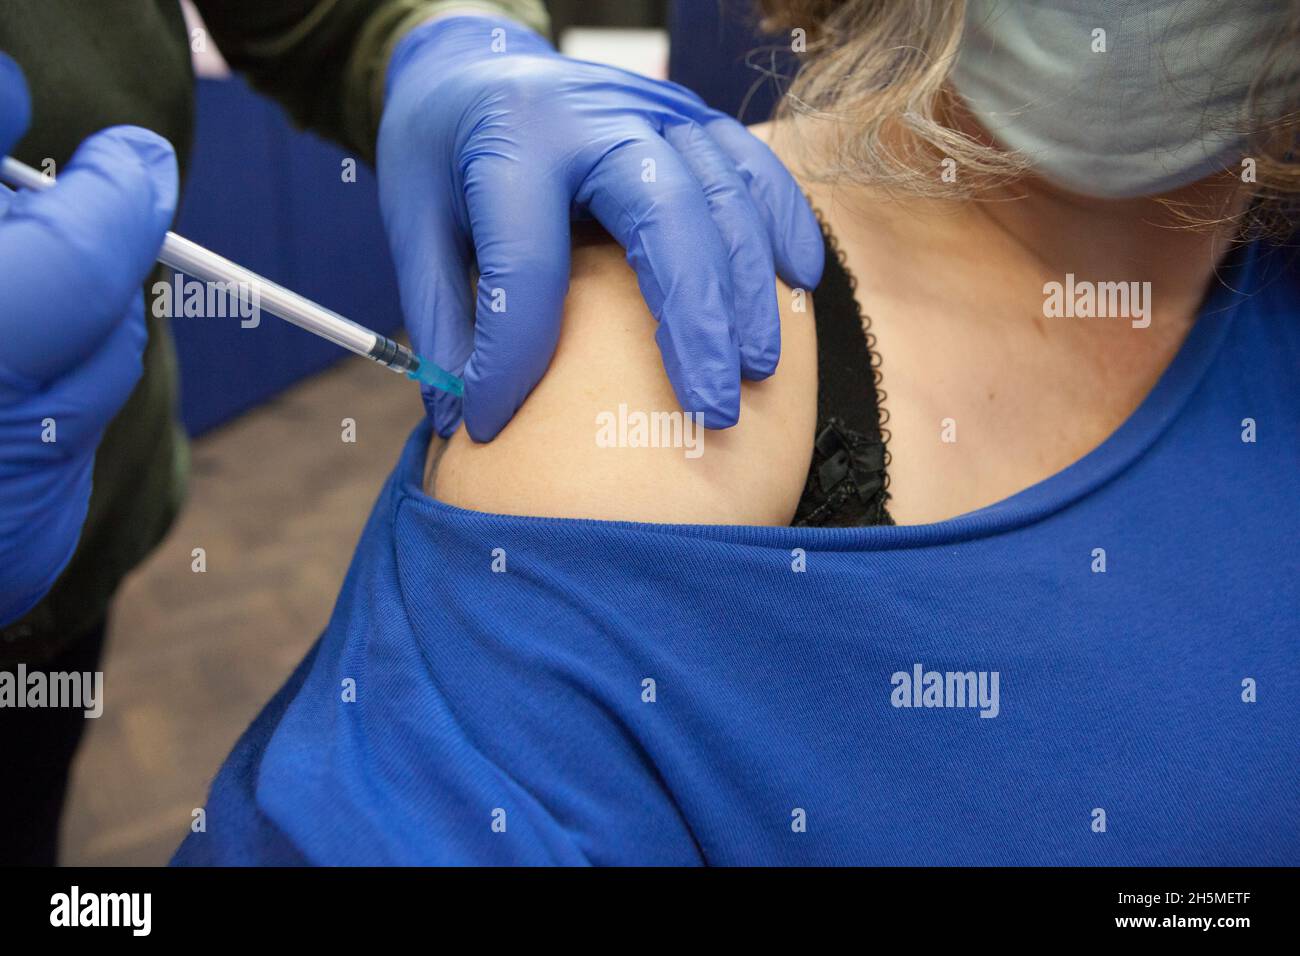 London, UK, 10 November 2021: at a vaccination centre next to Kennington Oval cricket ground a steady stream of people attend to get their booster jabs or first jabs of Pfizer coronavirus vaccine. The photographer receives her booster dose.  Anna Watson/Alamy Live News Stock Photo